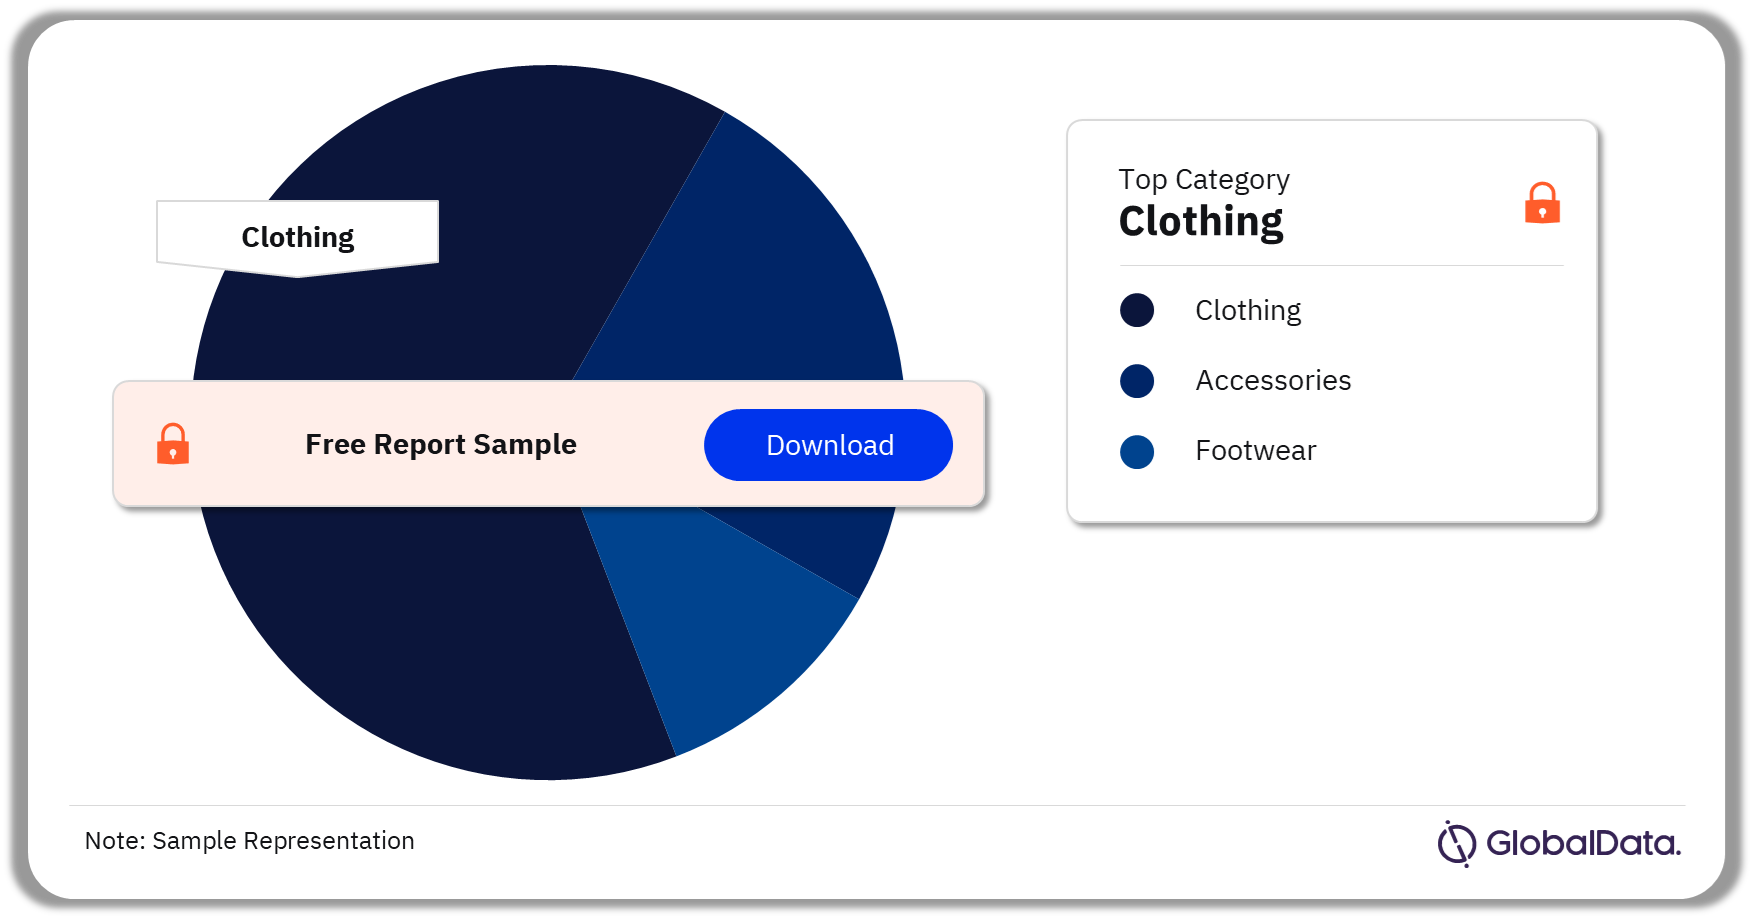 APAC Apparel Market Analysis by Categories, 2022 (%)